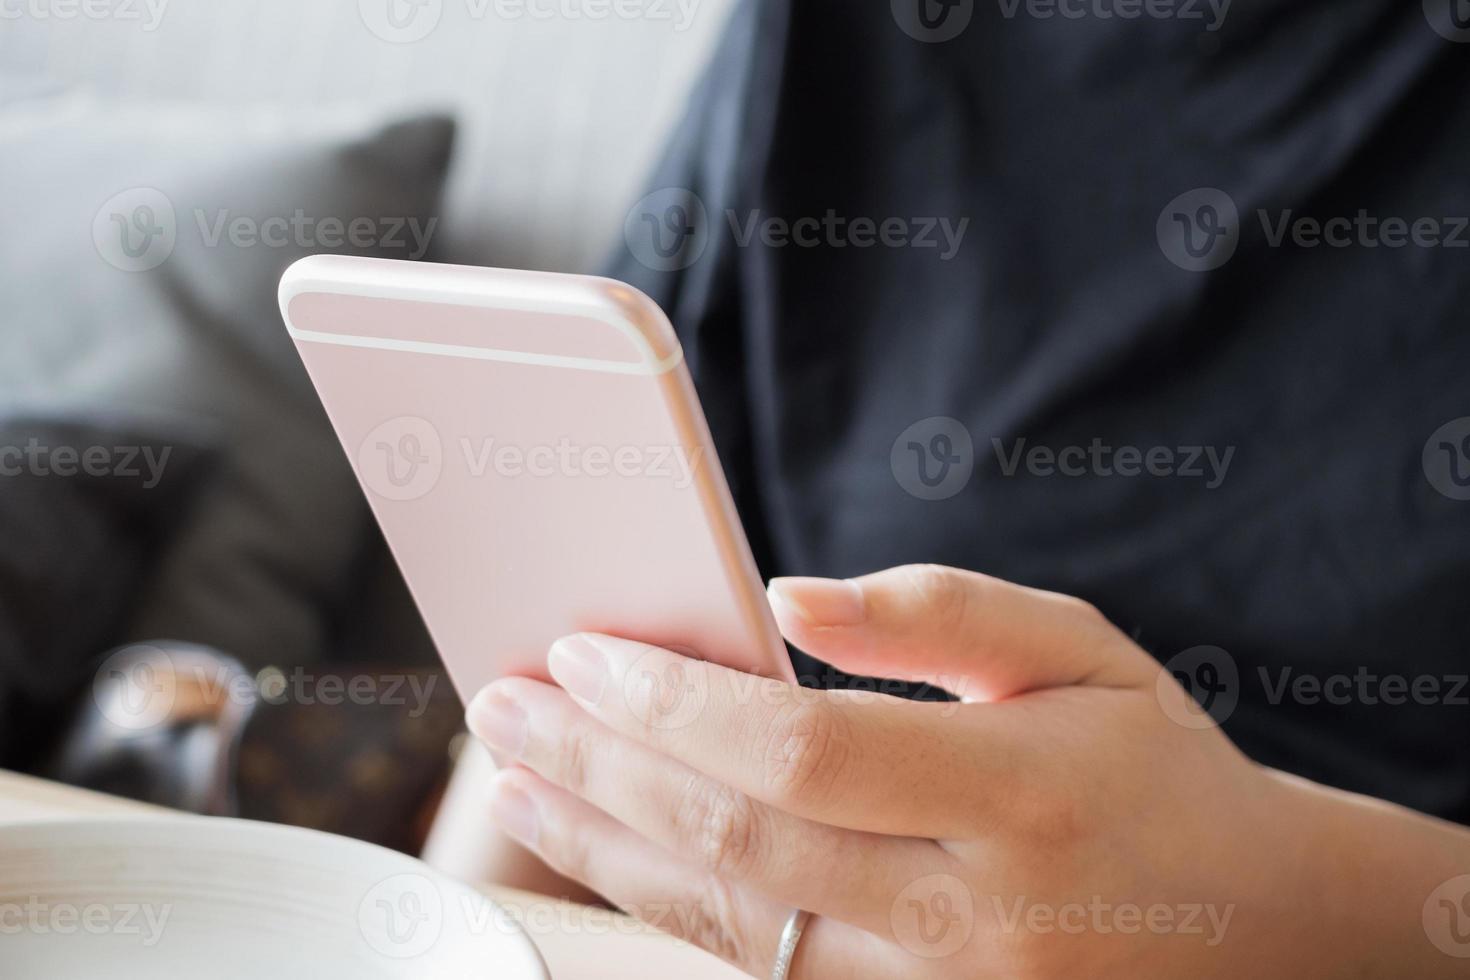 Woman with diamond ring on hand using smartphone in cafe restaurant photo